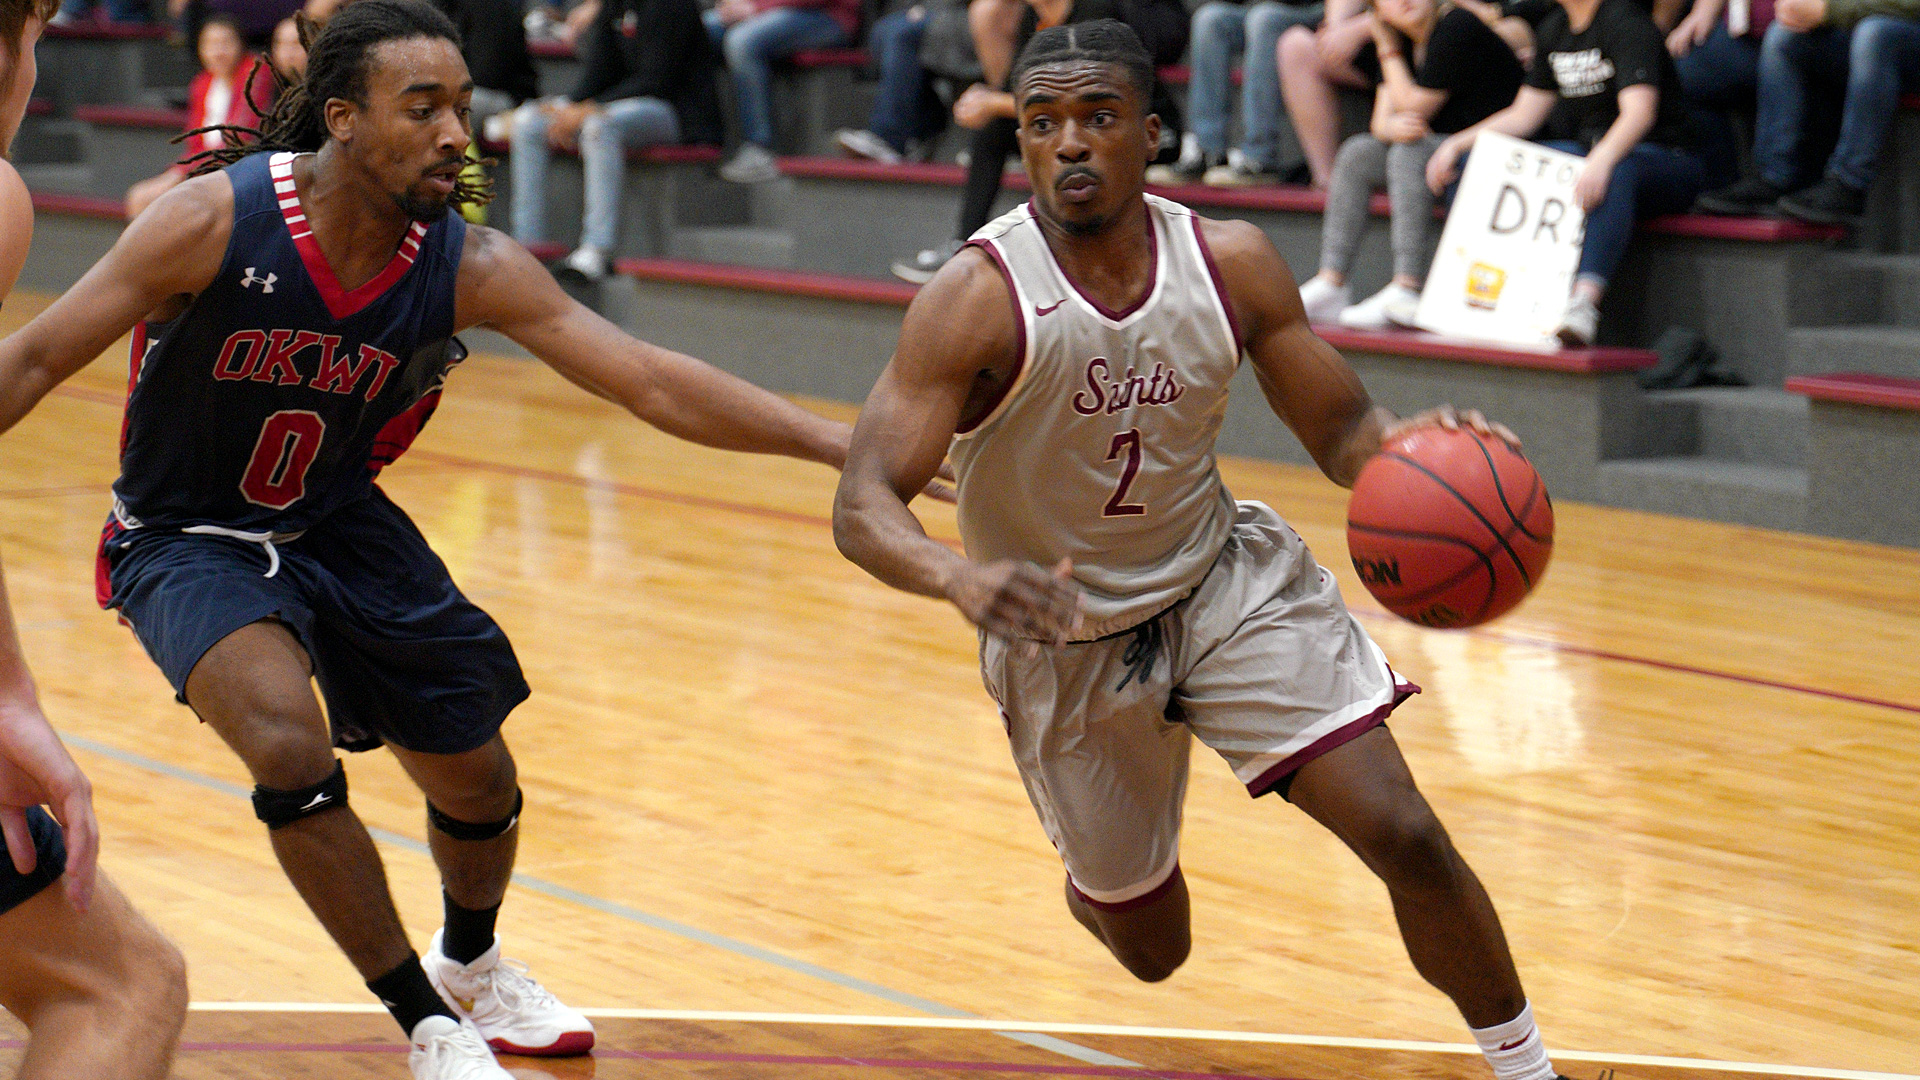 CCCB senior Josh Crawford scored four points and handed out three assists in the Saints 75-69 win over Lincoln Christian University on Tuesday.